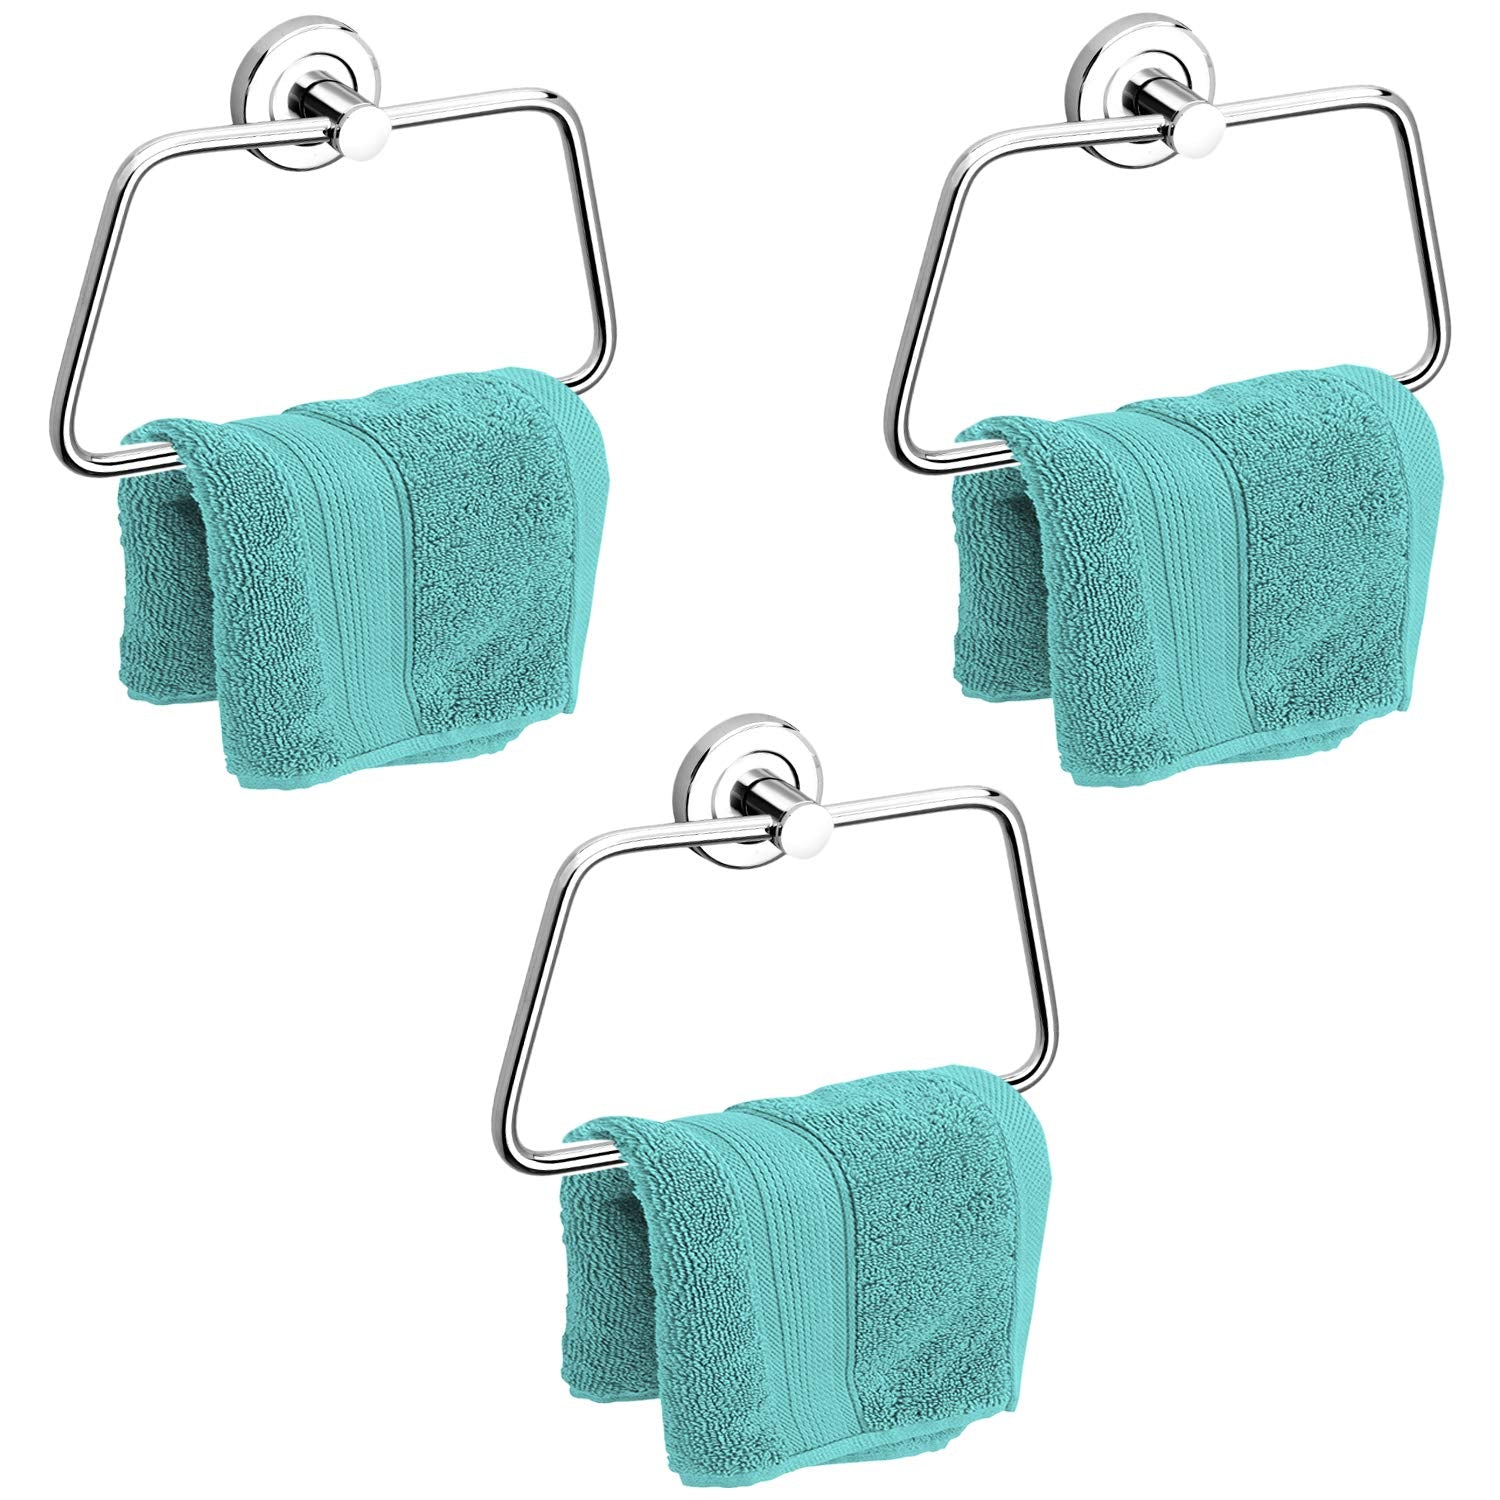 Plantex Stainless Steel Towel Ring for Bathroom/Wash Basin/Napkin-Towel Hanger/Bathroom Accessories (Chrome-Rectangle) - Pack of 3